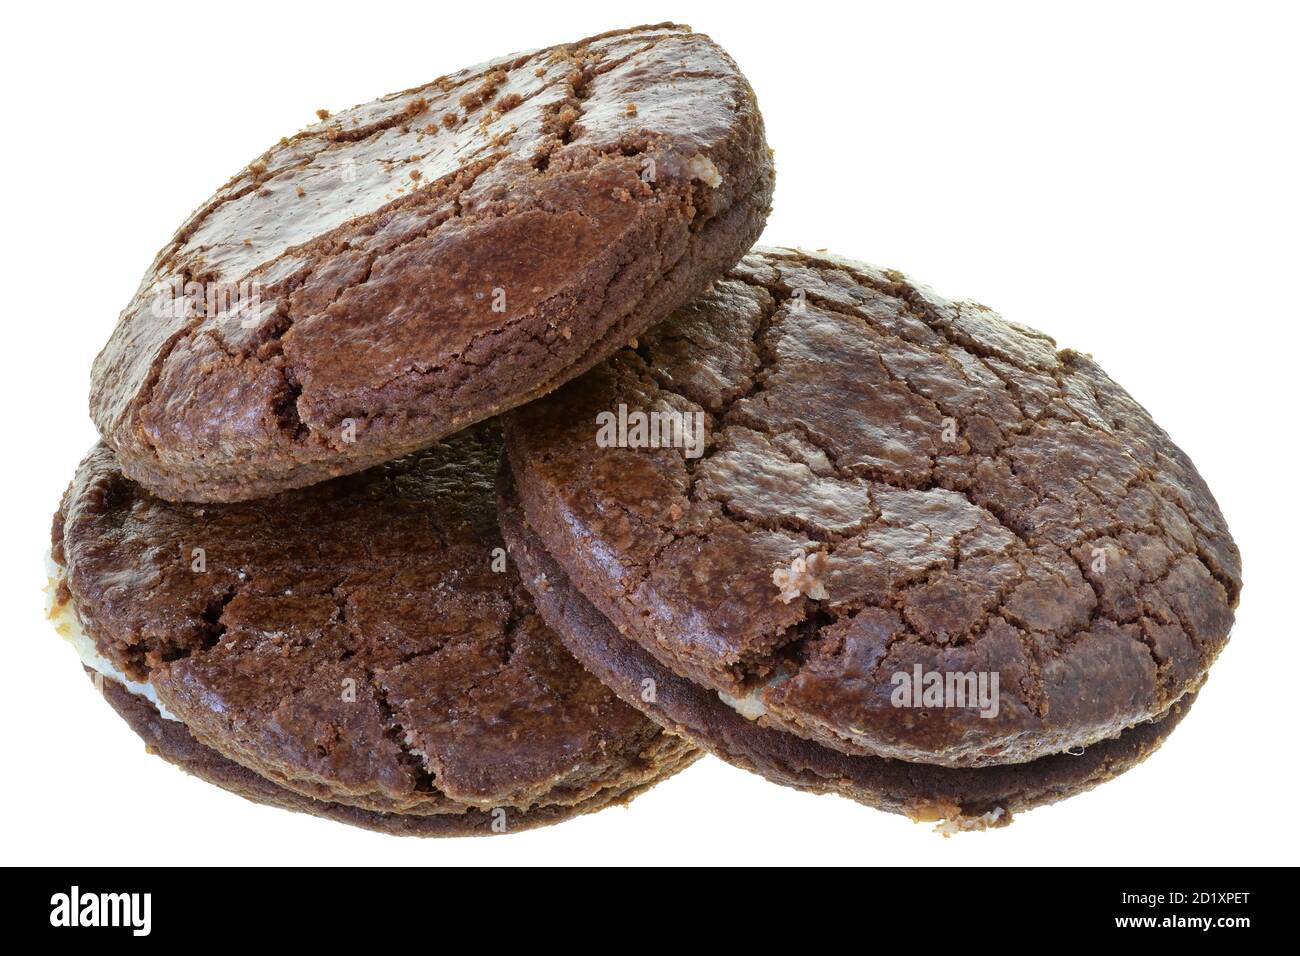 Appetizing chocolate chip cookies isolated on white background. Stock Photo